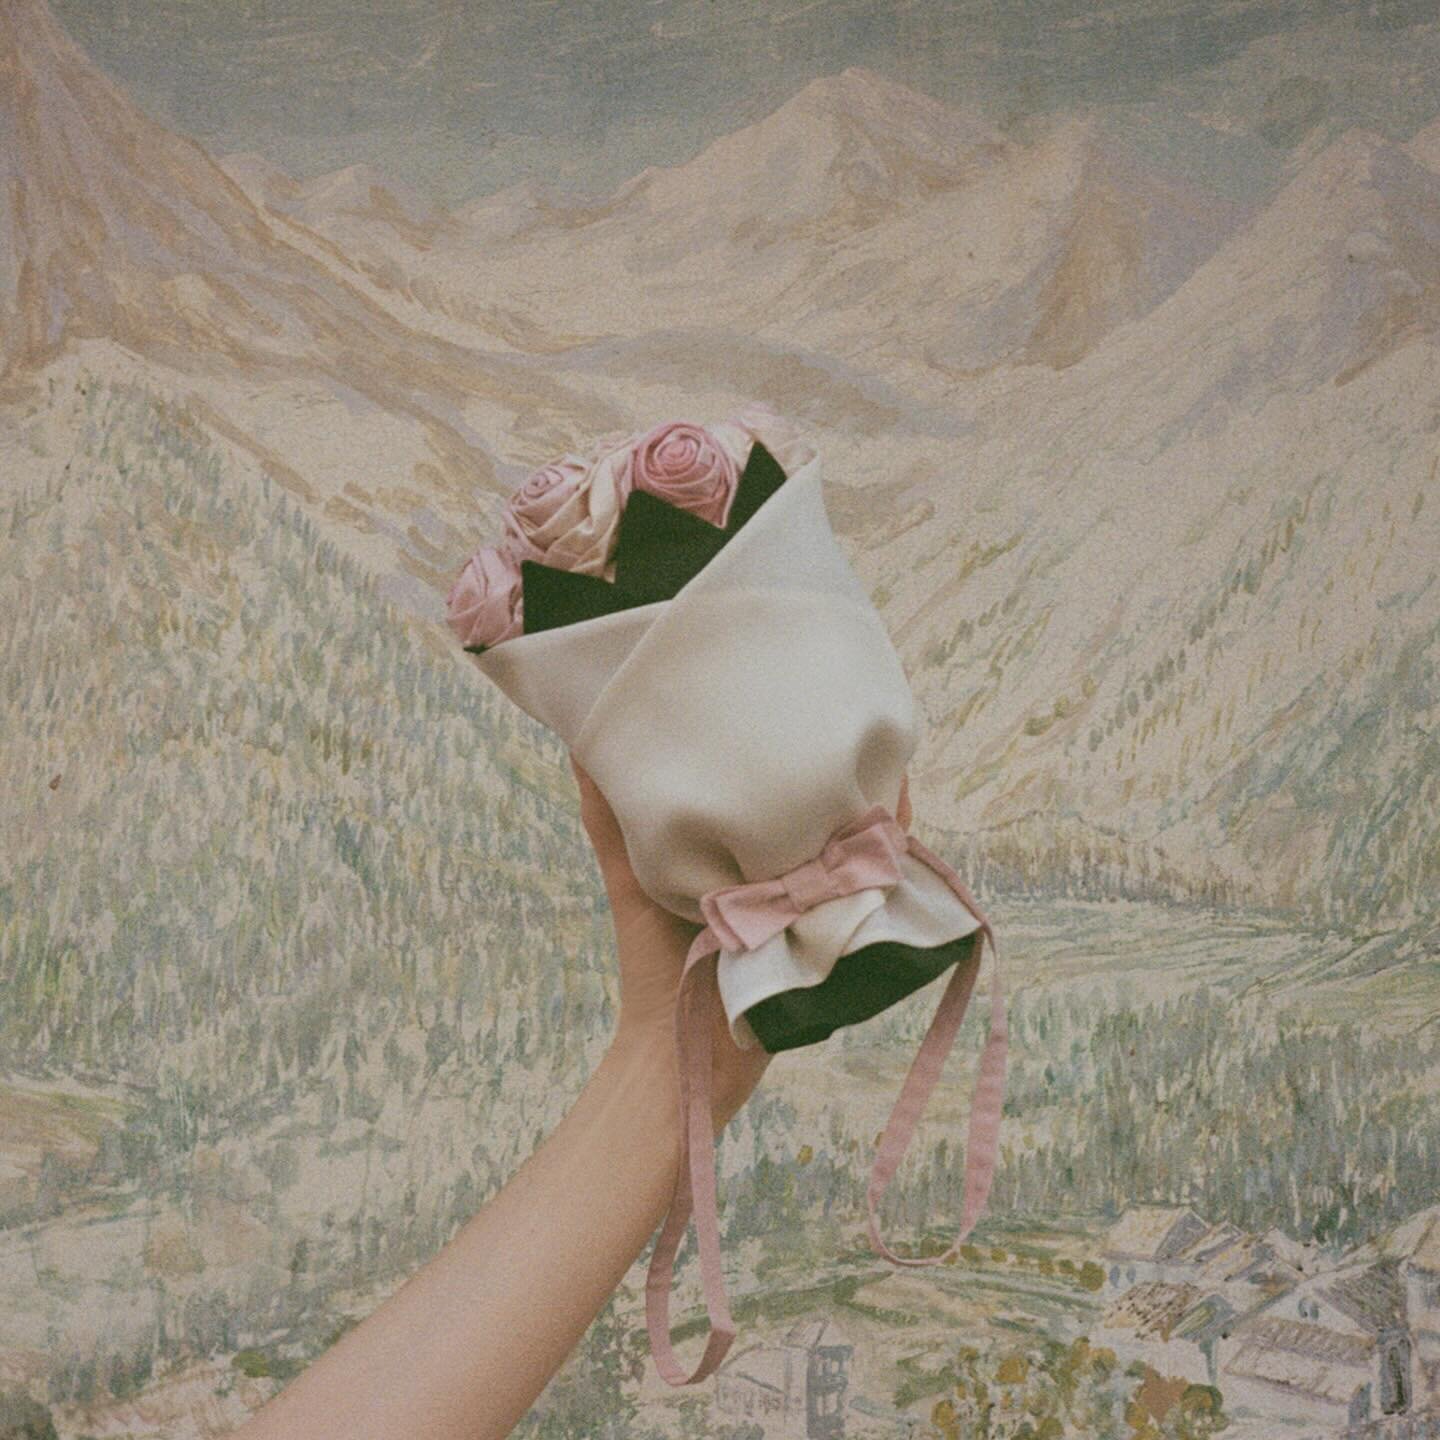 Bouquet to go / pour emporter. Wrapped in silk organza, as though freshly purchased from the florist. Available on my website Sunday at 10am EST🏔️